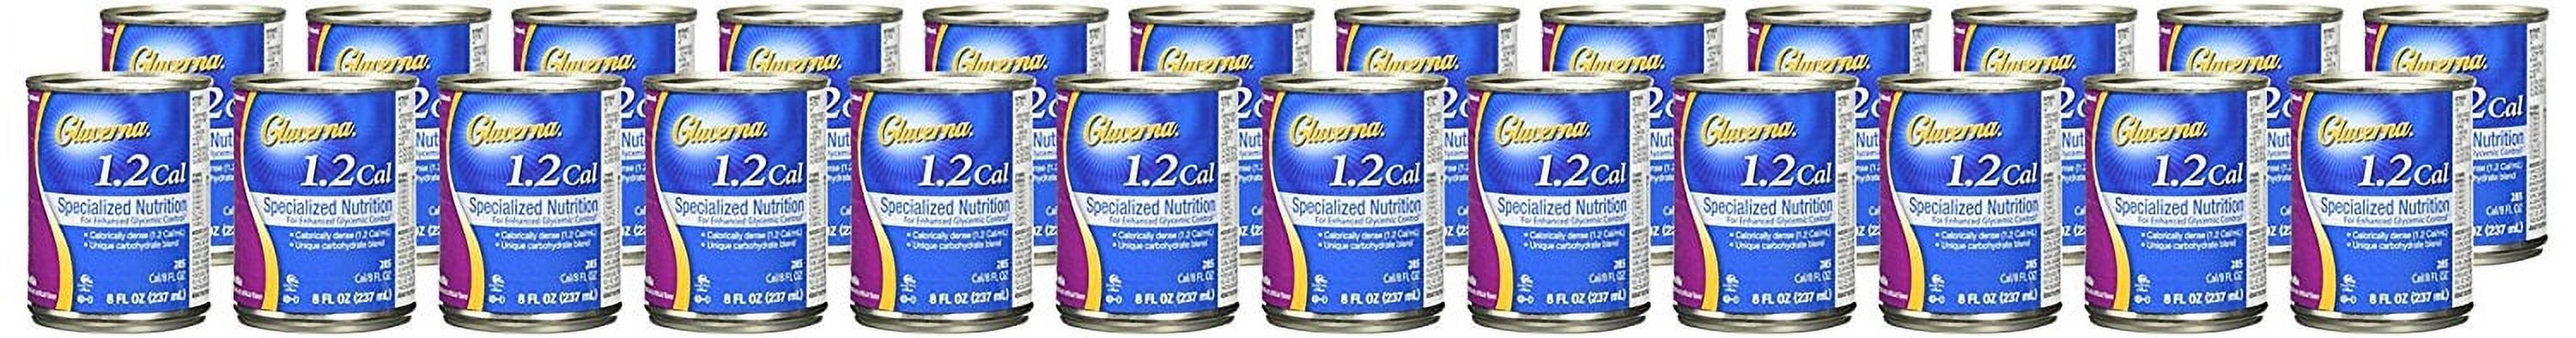 Oral Supplement Glucerna 1.2 Cal Vanilla Flavor 8 oz. Can Ready to Use - image 3 of 4